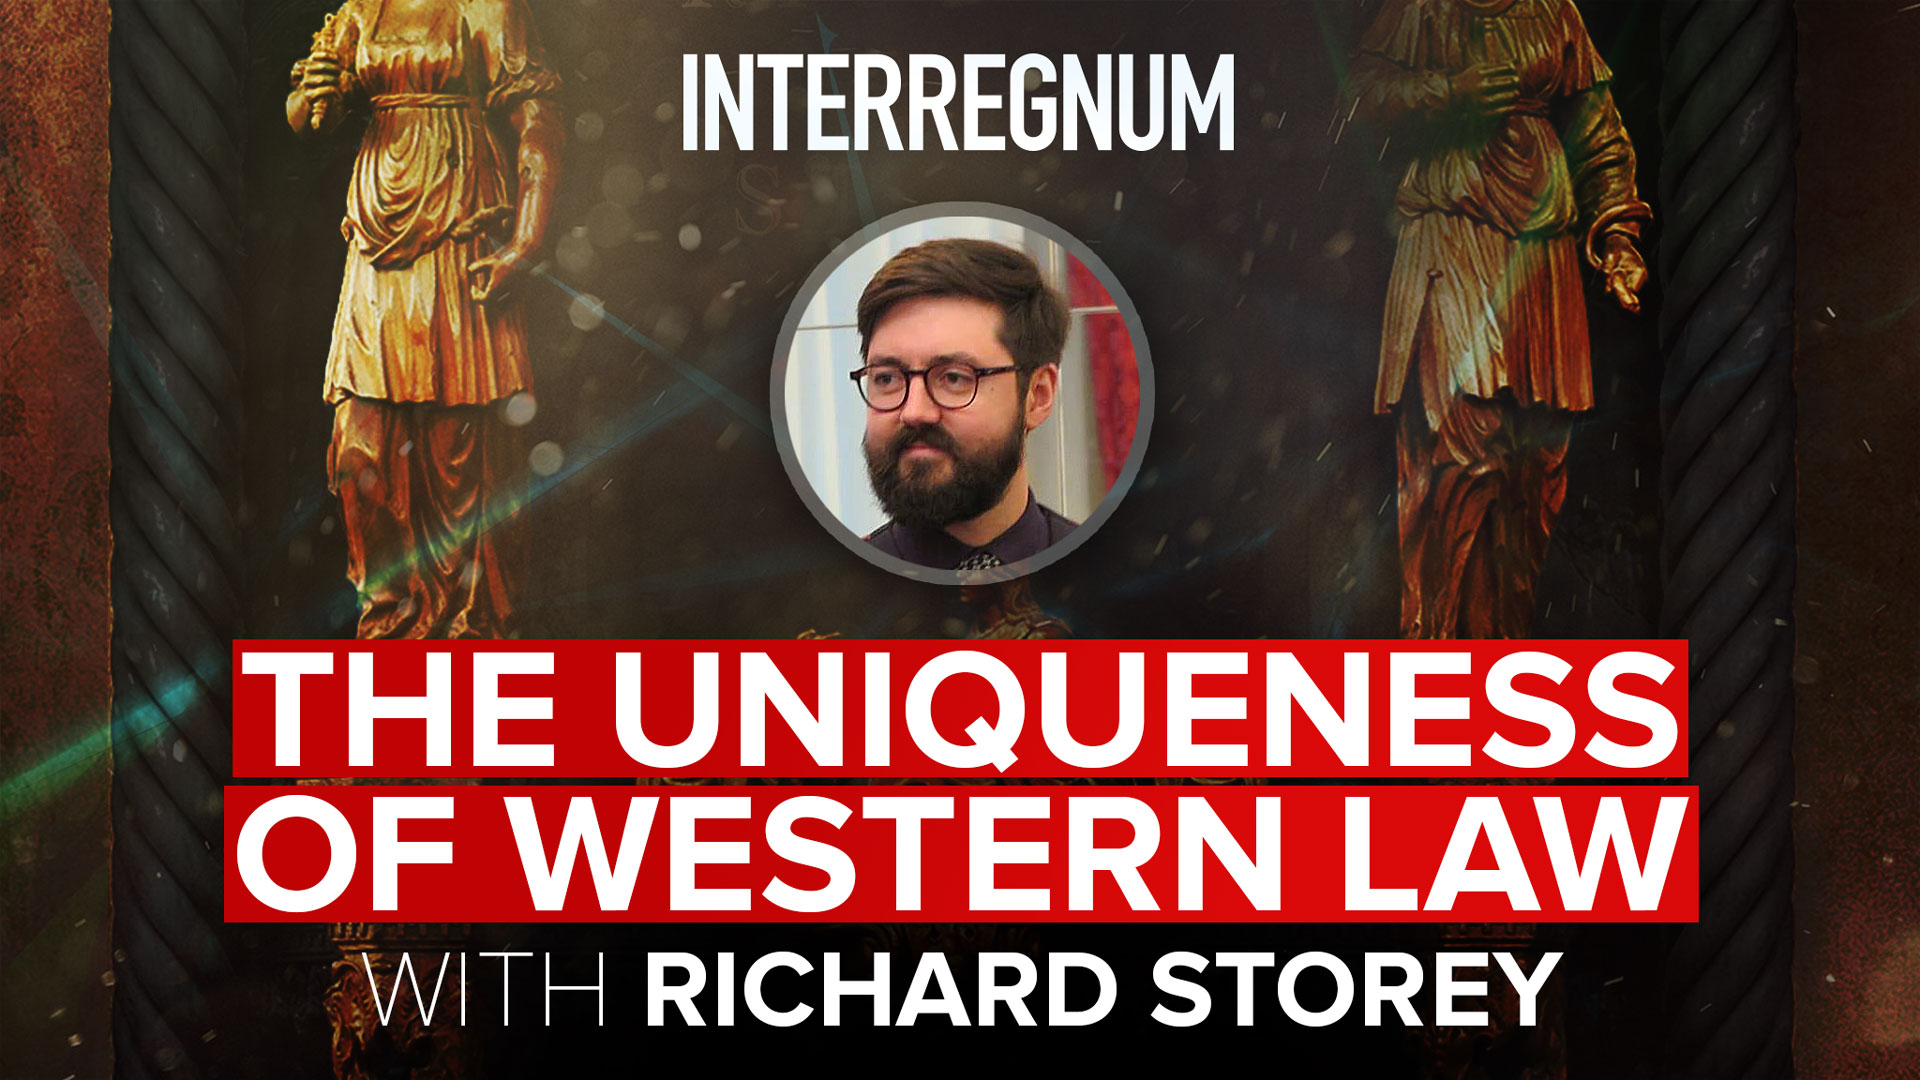 The Uniqueness of Western Law with Richard Storey